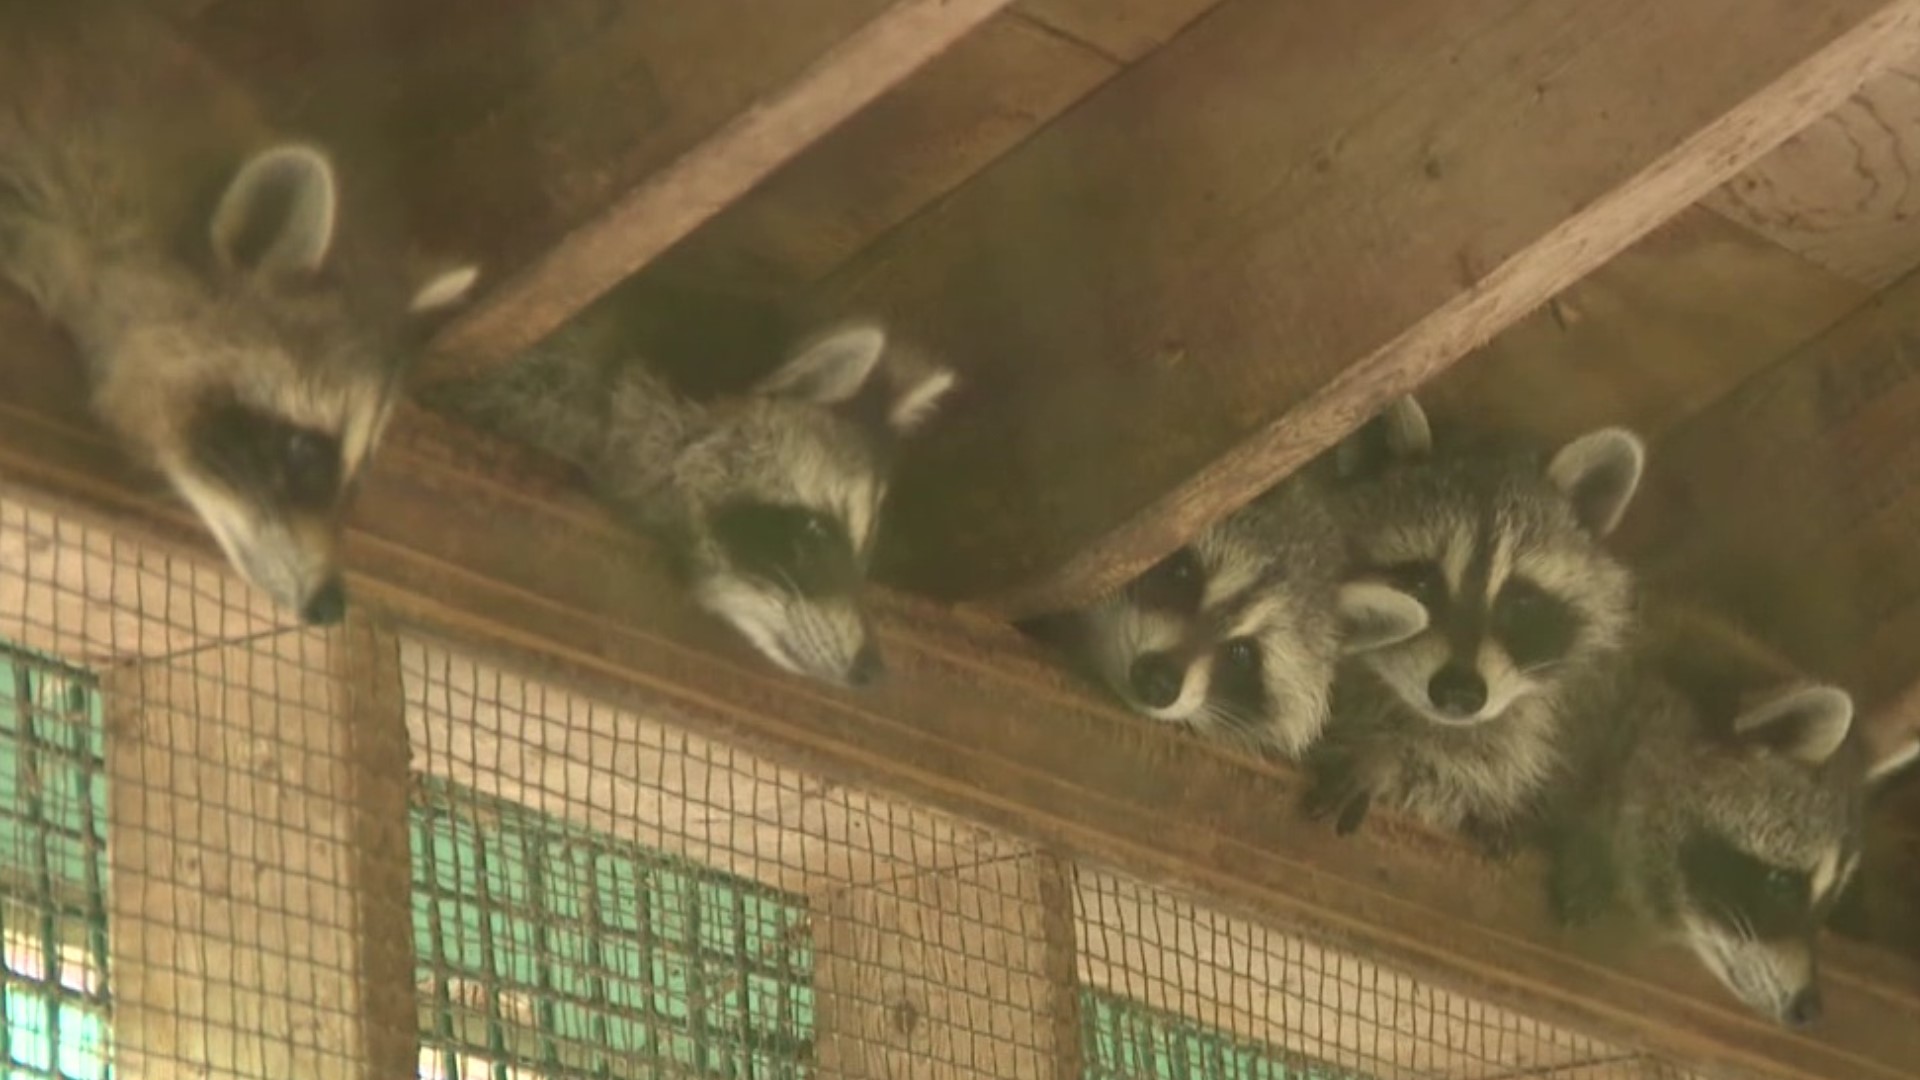 Pocono Wildlife Rehabilitation and Education Center near Saylorsburg is opening its doors this weekend for its biggest fundraiser of the year.